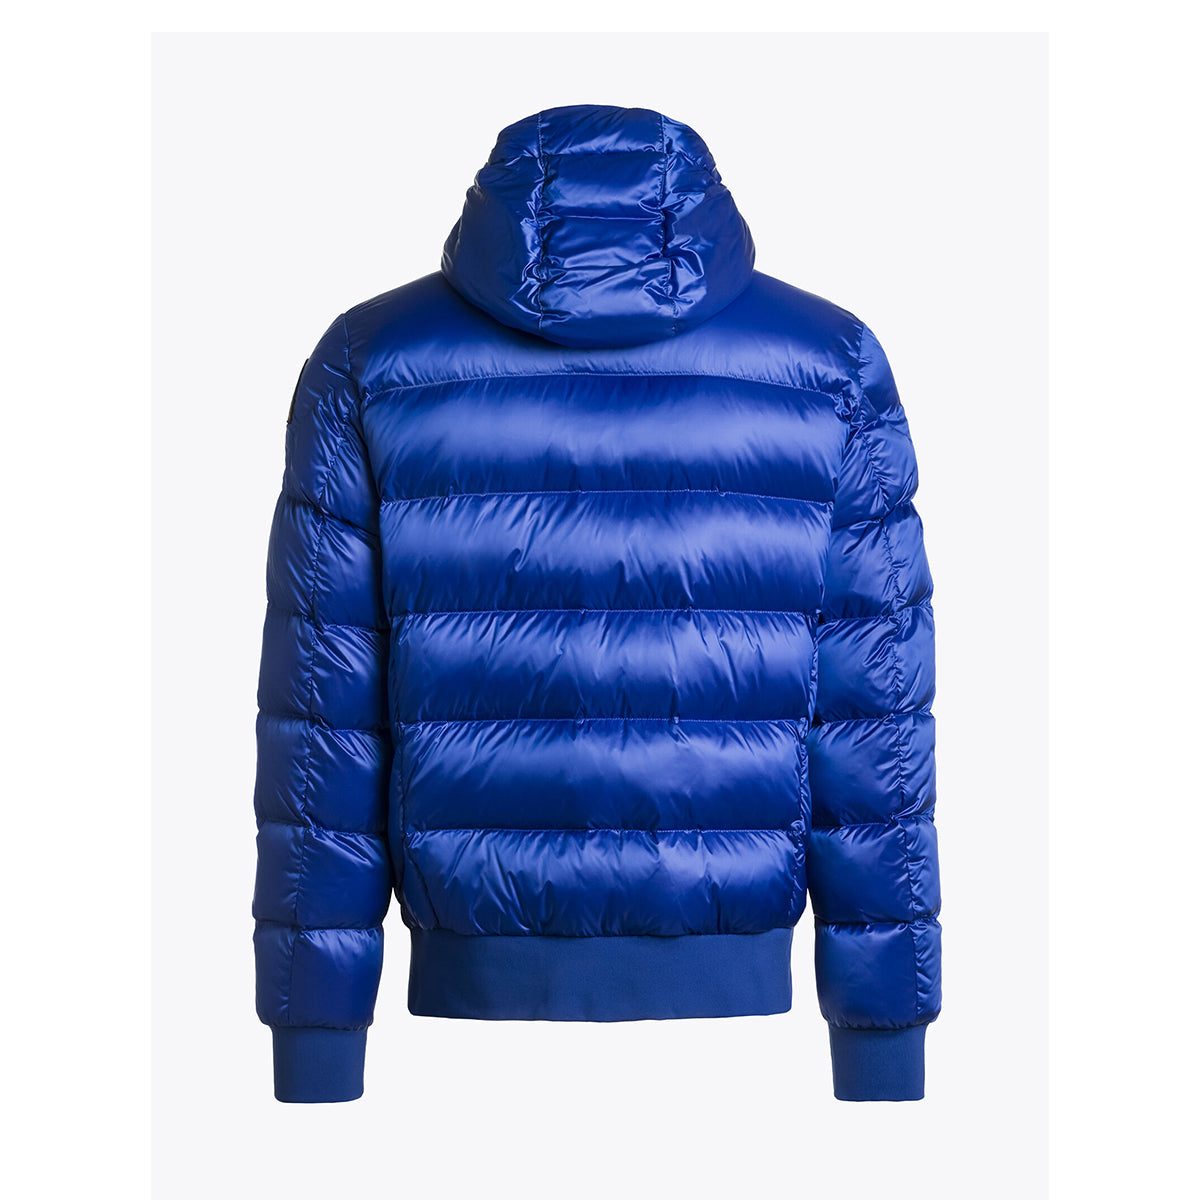 Parajumpers - Pharrell Quilted Puffer Jacket in Dazzling Blue | Nigel Clare